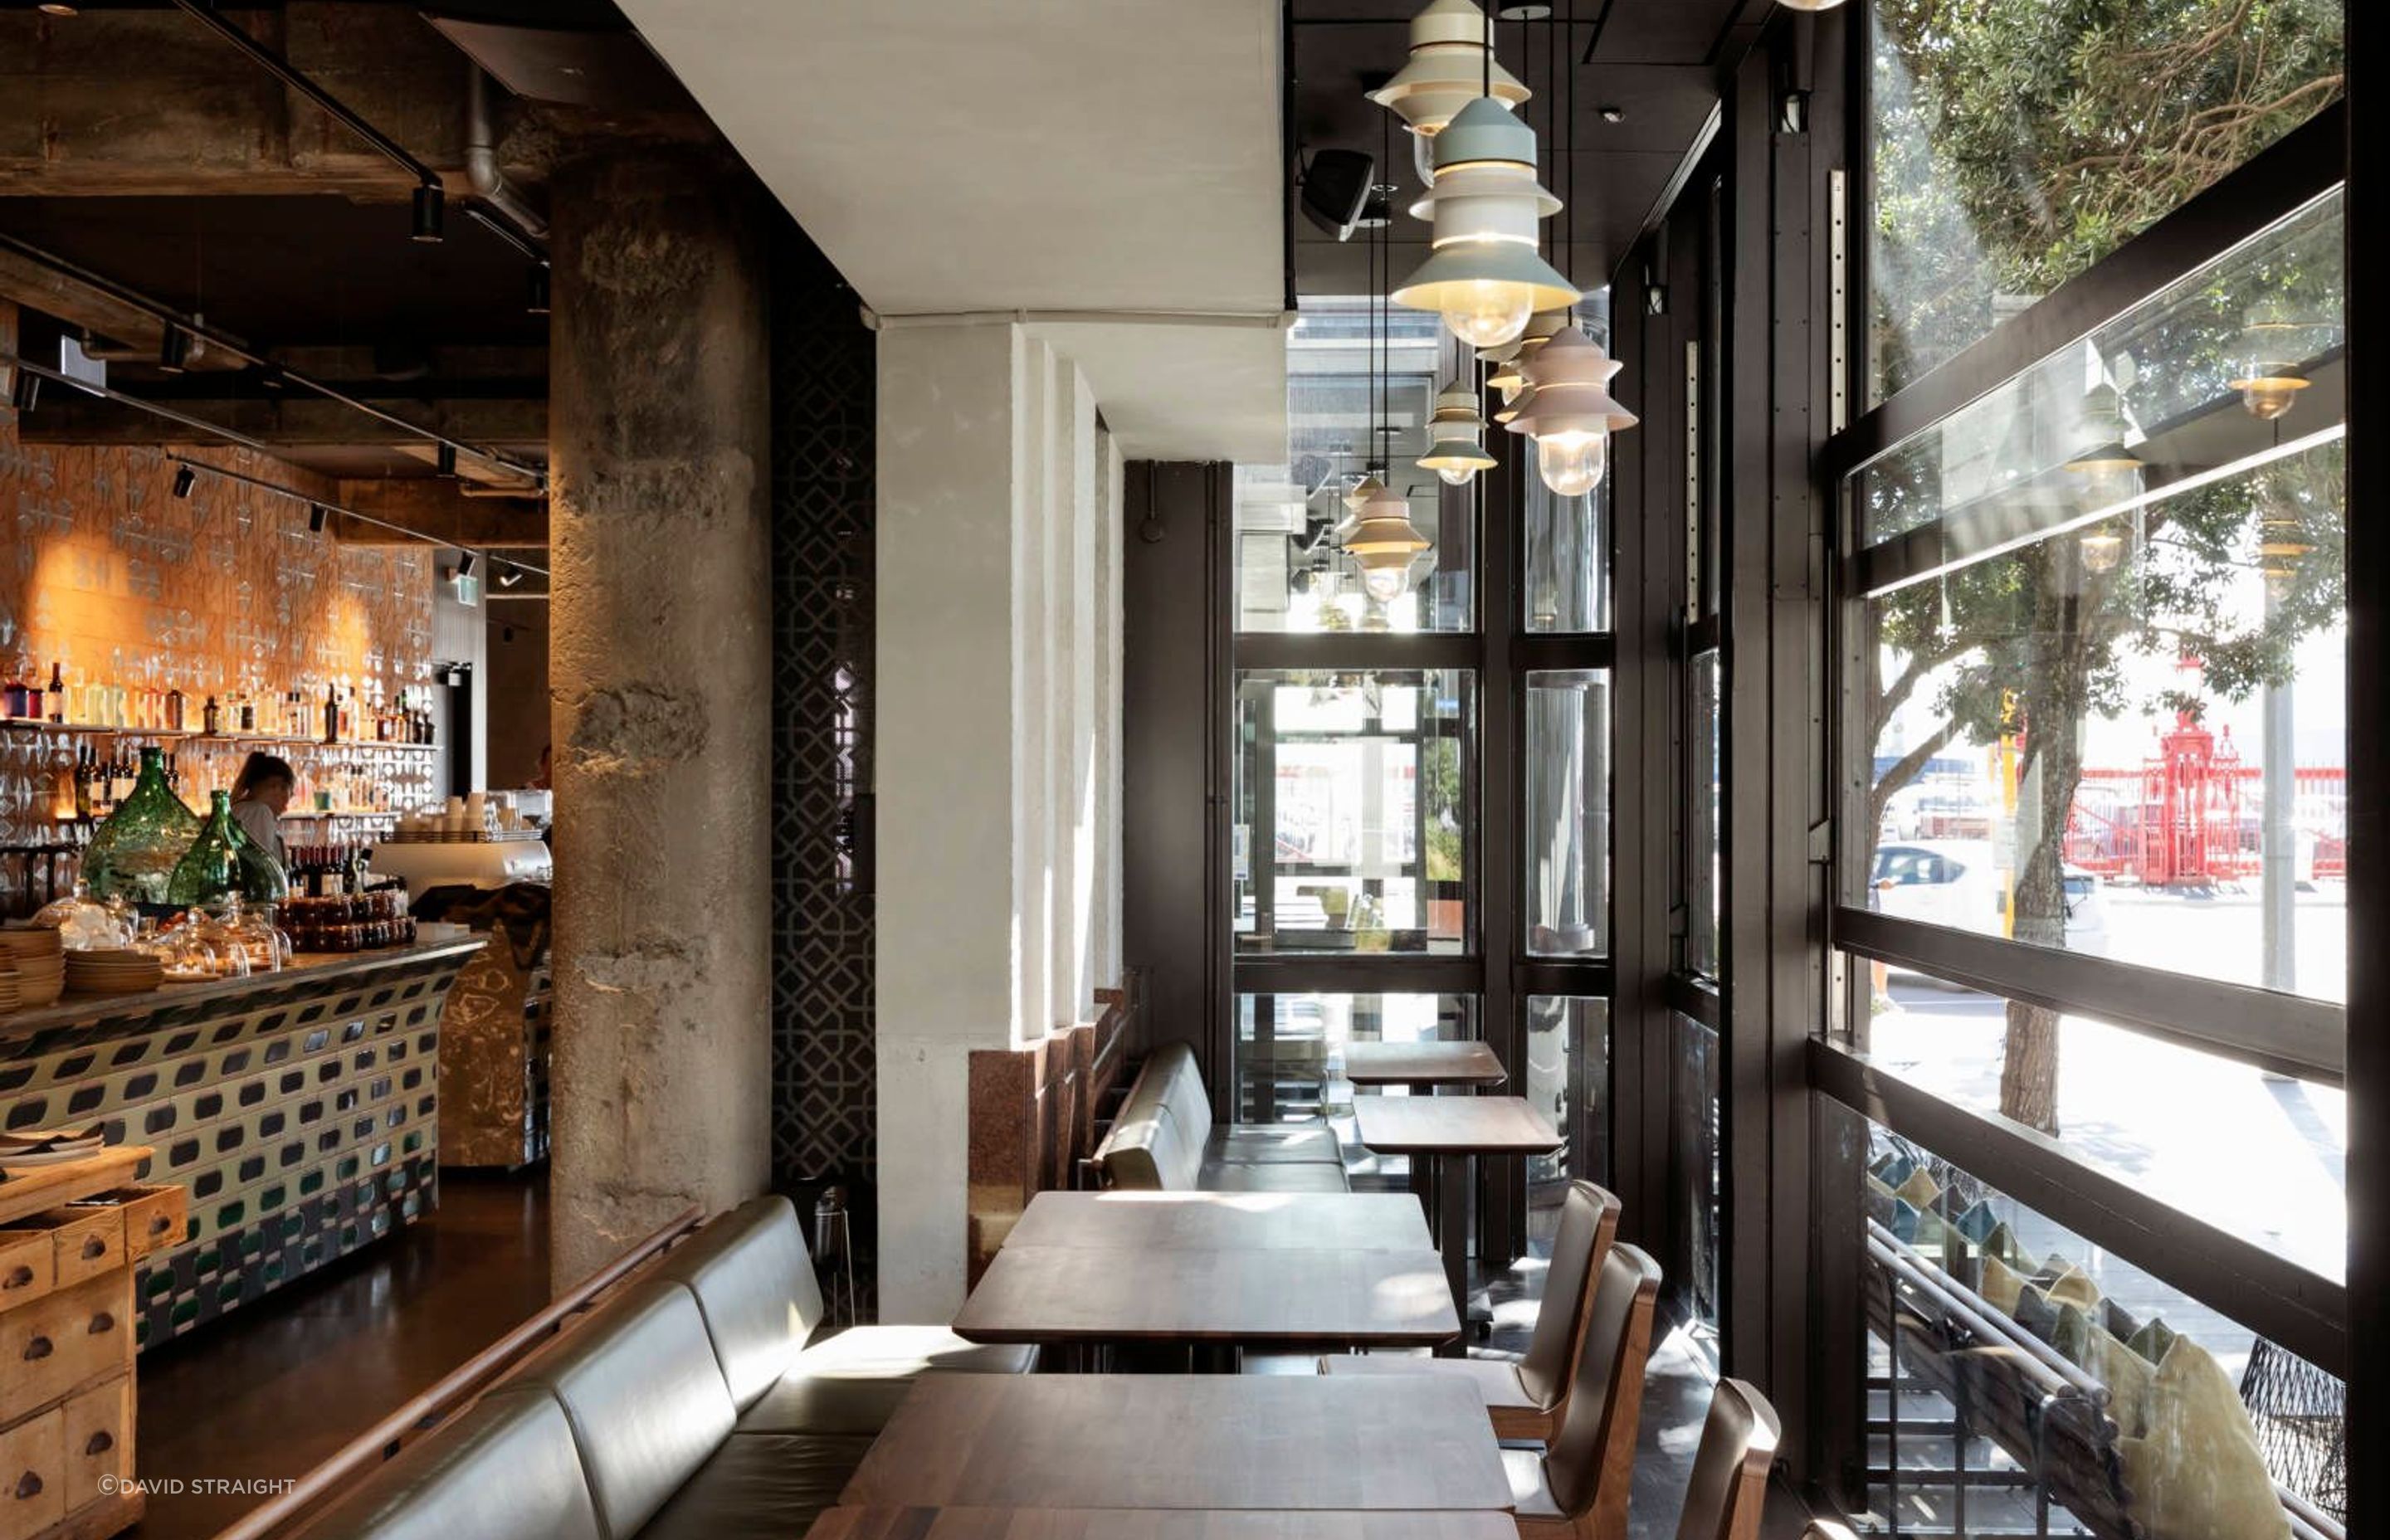 A group of small pendant lights create warmth in the dining space, without overwhelming the narrow area between the facade and the internal heritage wall.